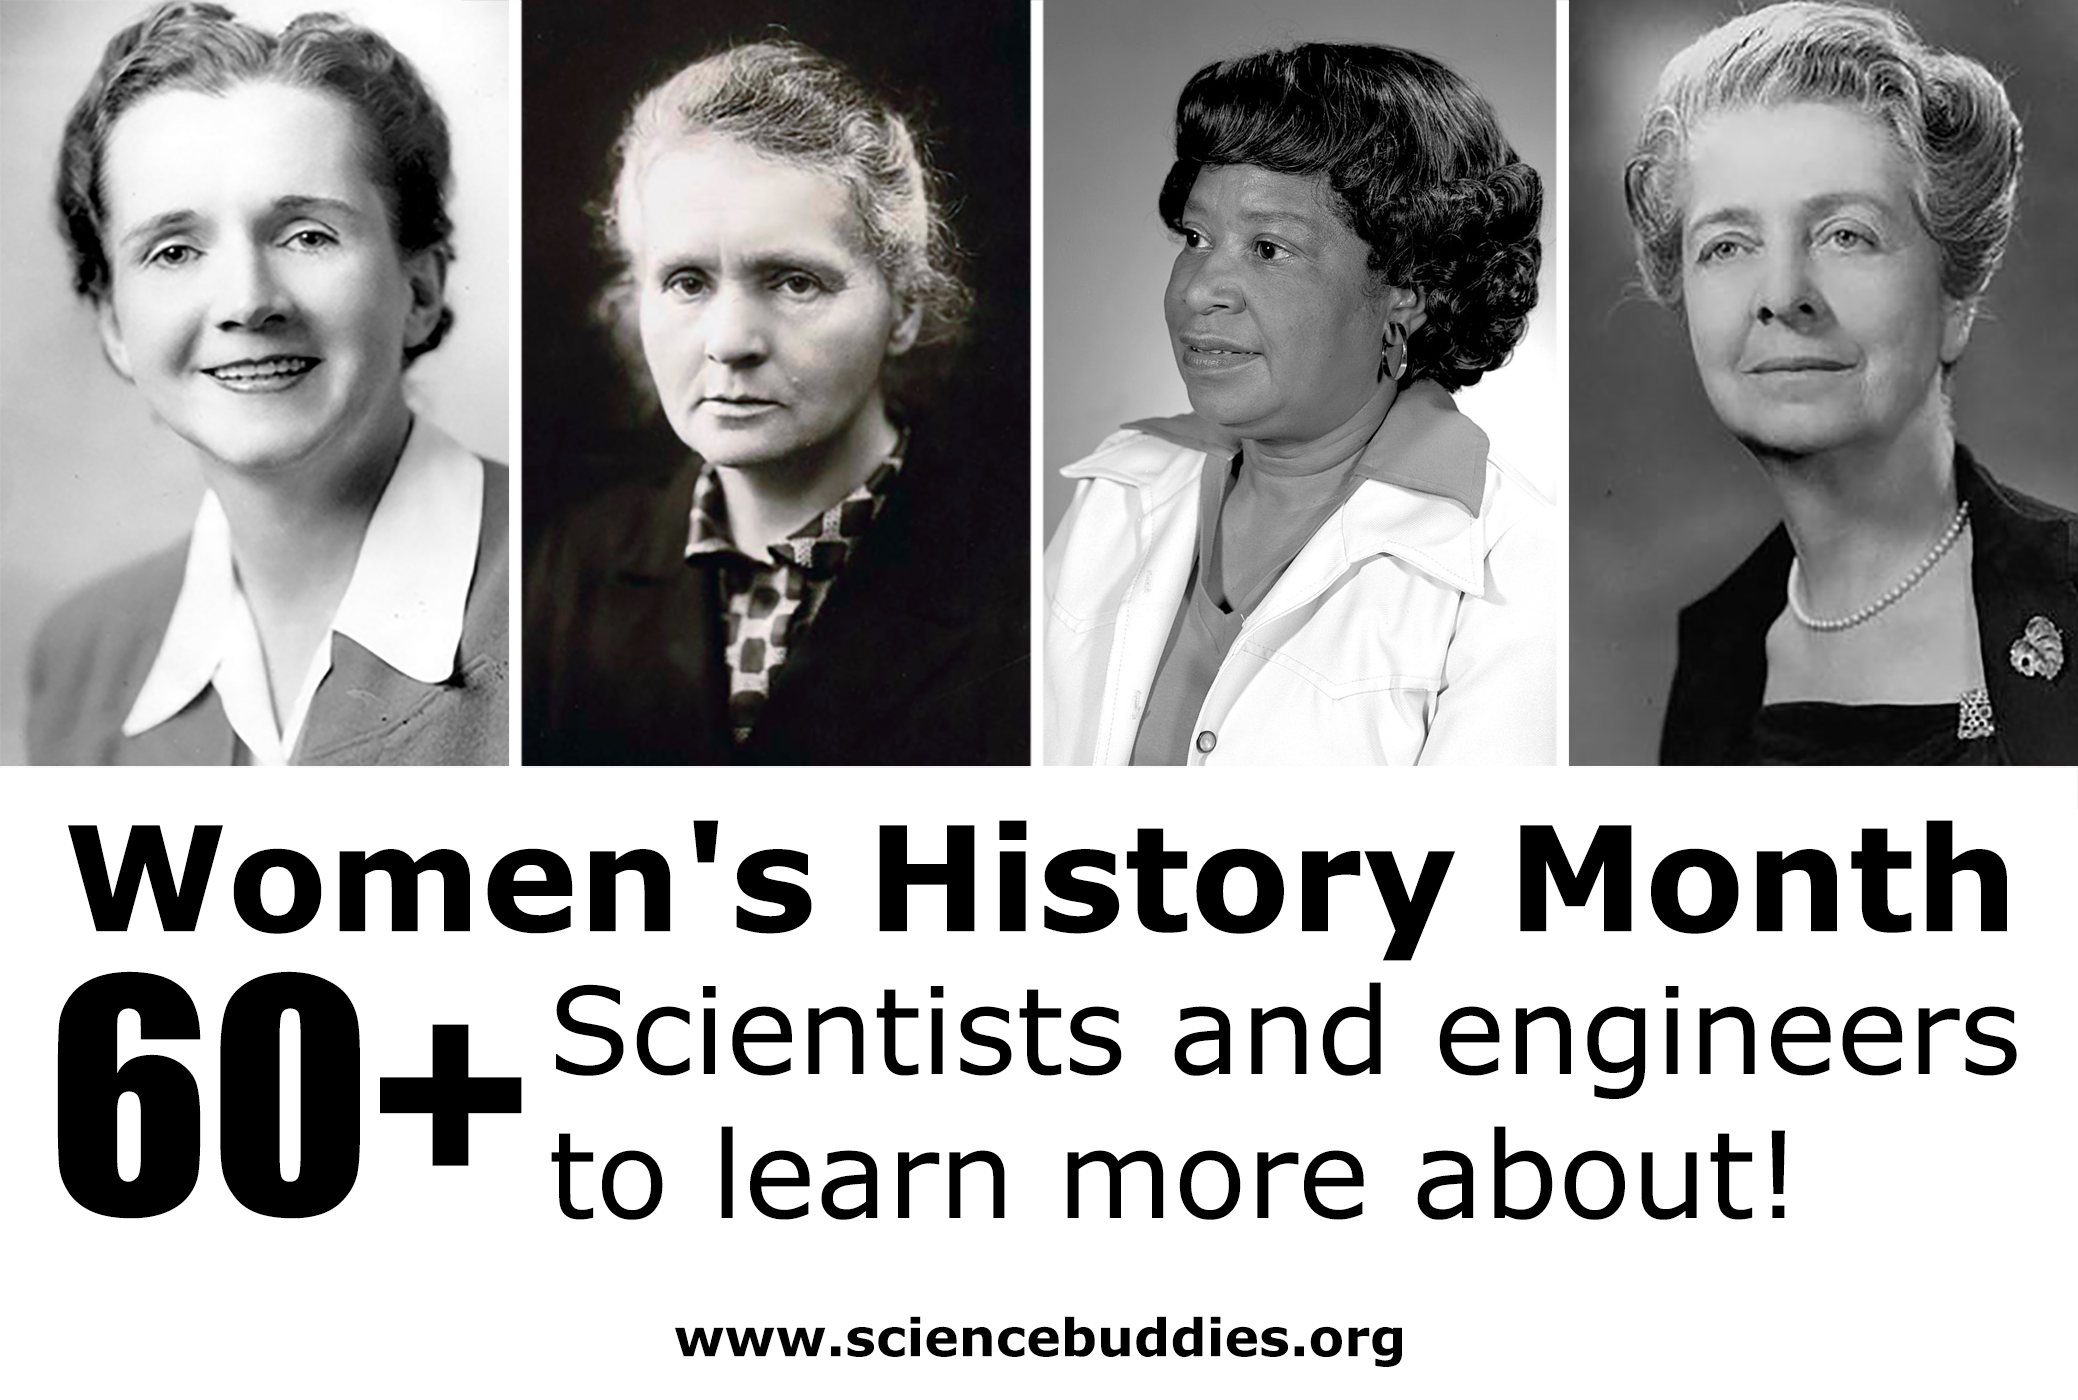 Images of 4 women in STEM from science history